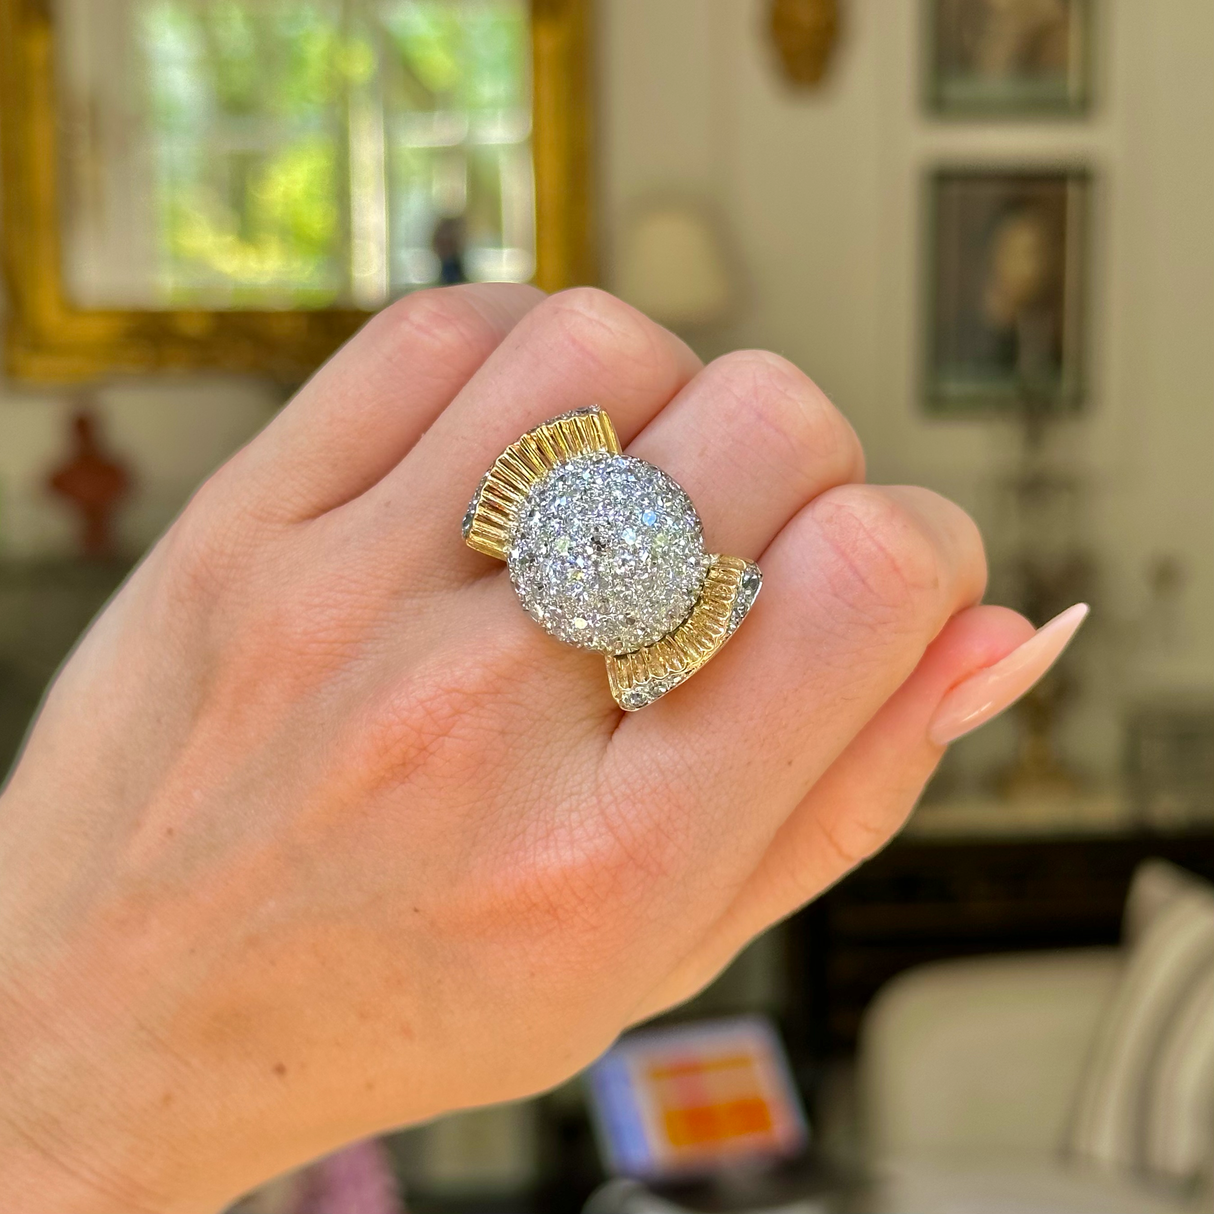 Cartier diamond bombe ring, front view. Worn on hclosed hand.